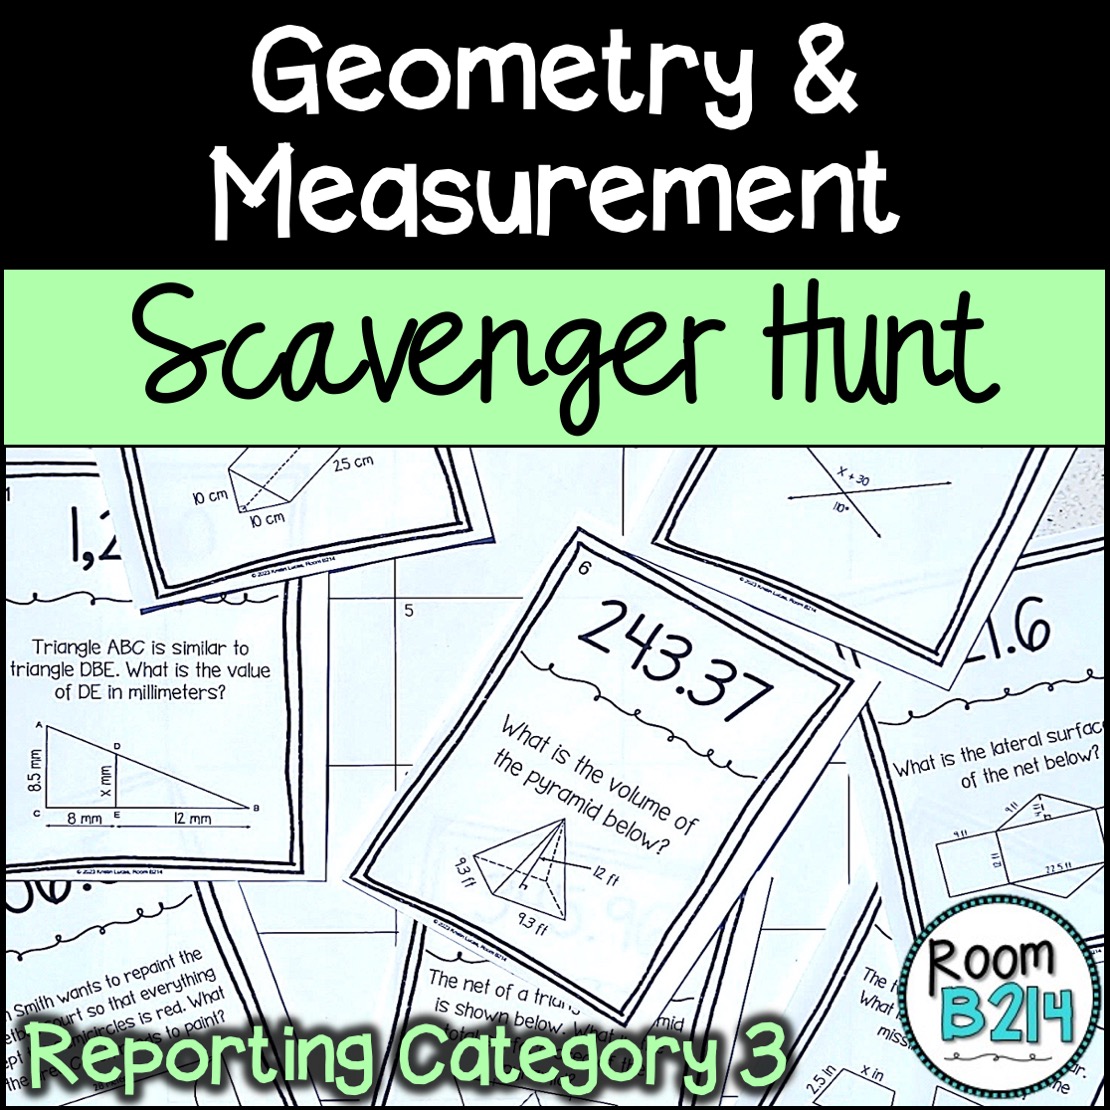 Reporting Category 3: Geometry and Measurement Scavenger Hunt